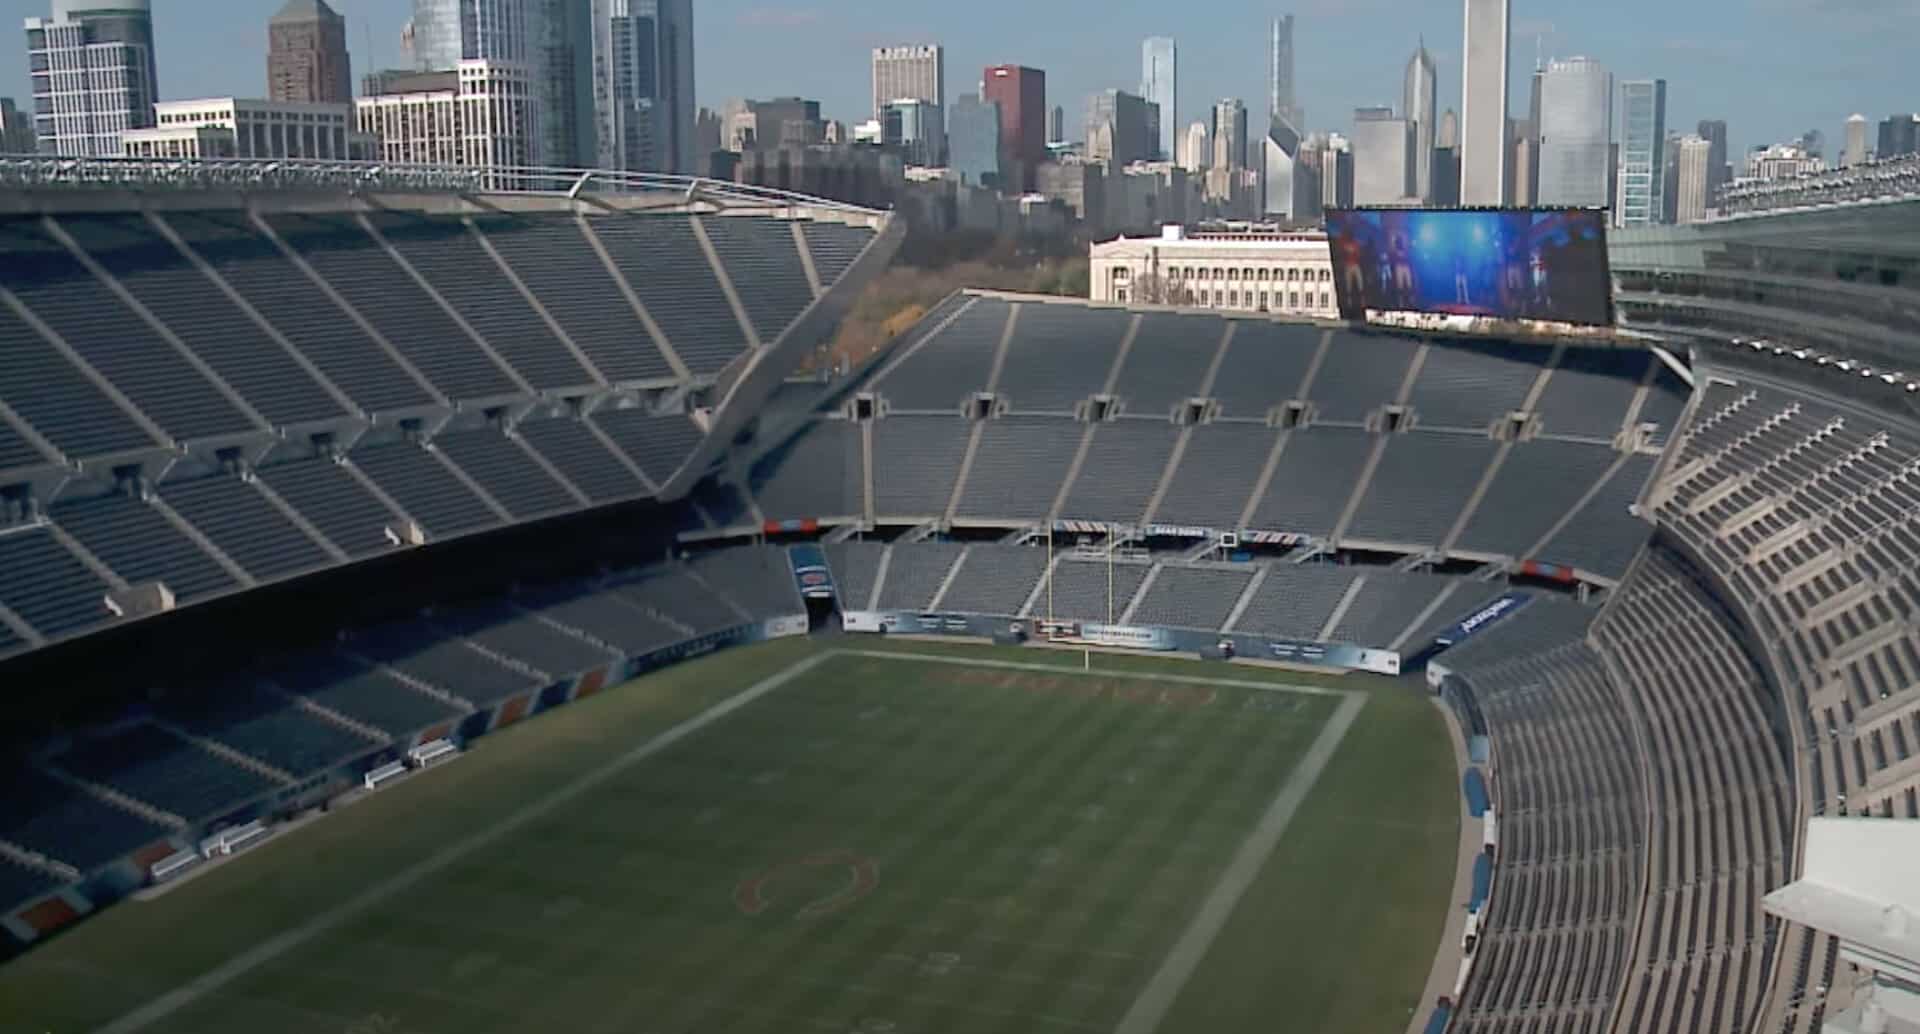 Chicago Bears appear to be on the verge of leaving Soldier Field